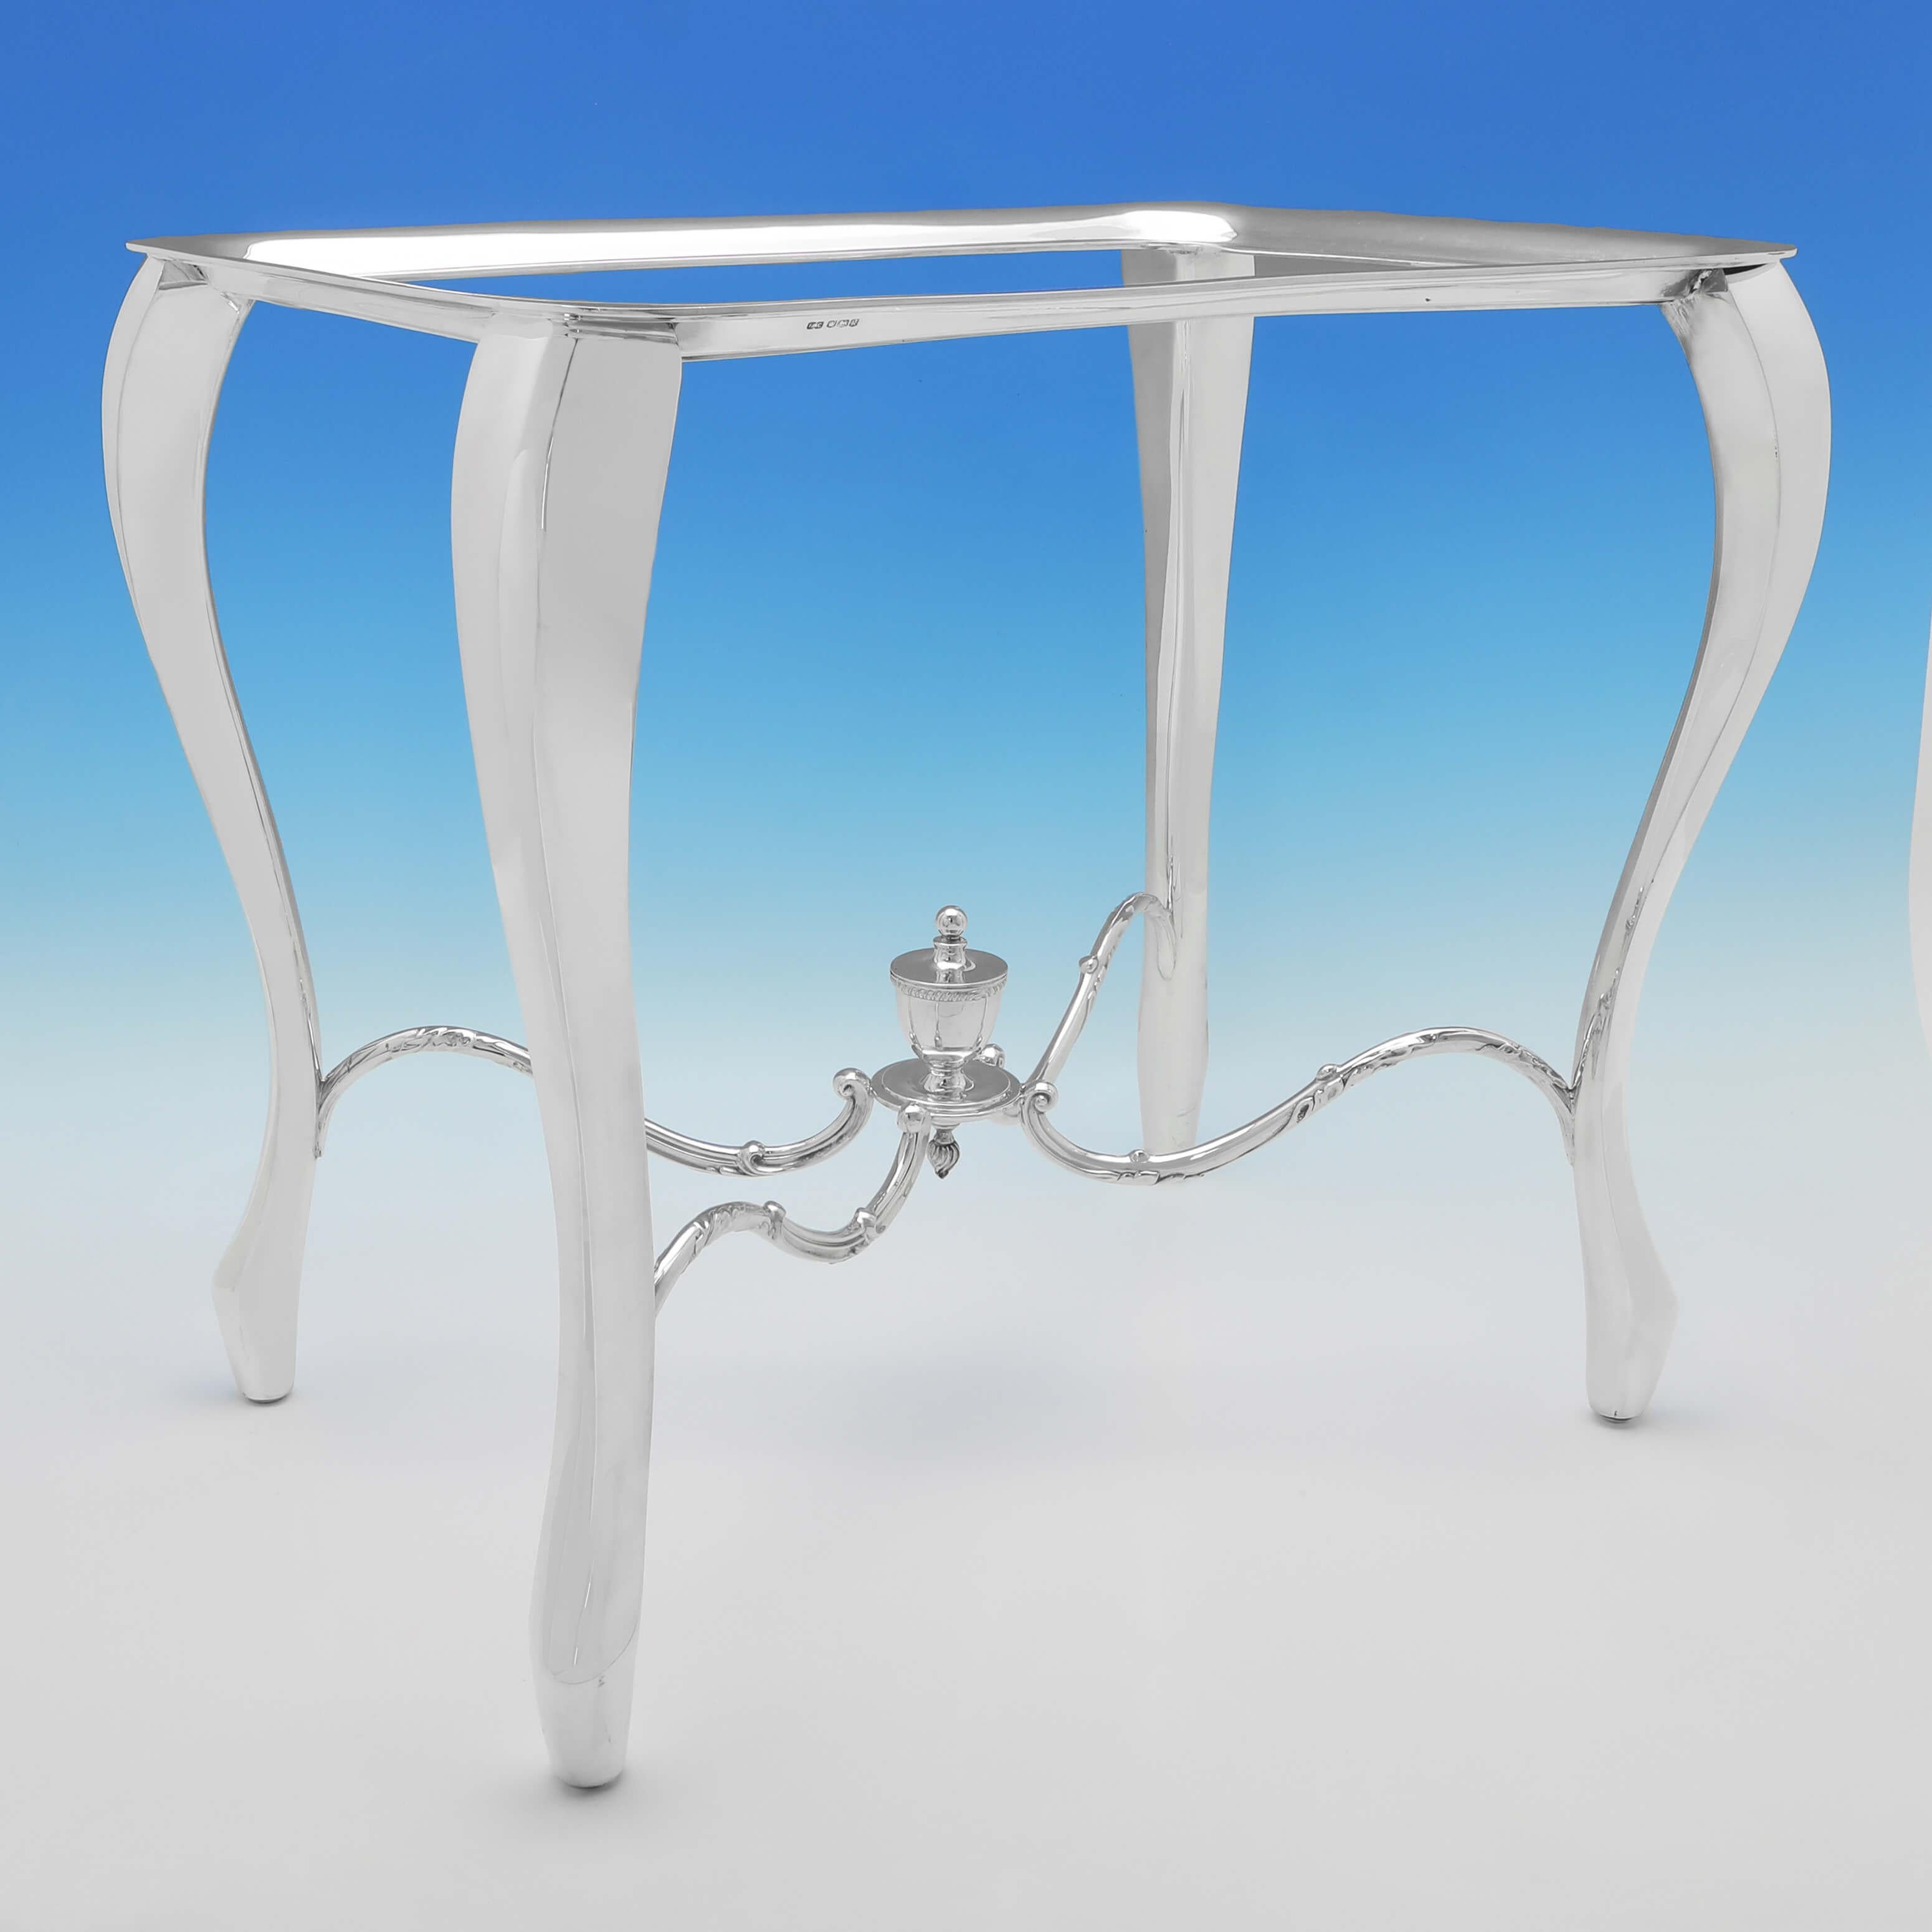 An Incredible, and likley Unique, English Sterling Silver Table - Made in 1927 For Sale 4